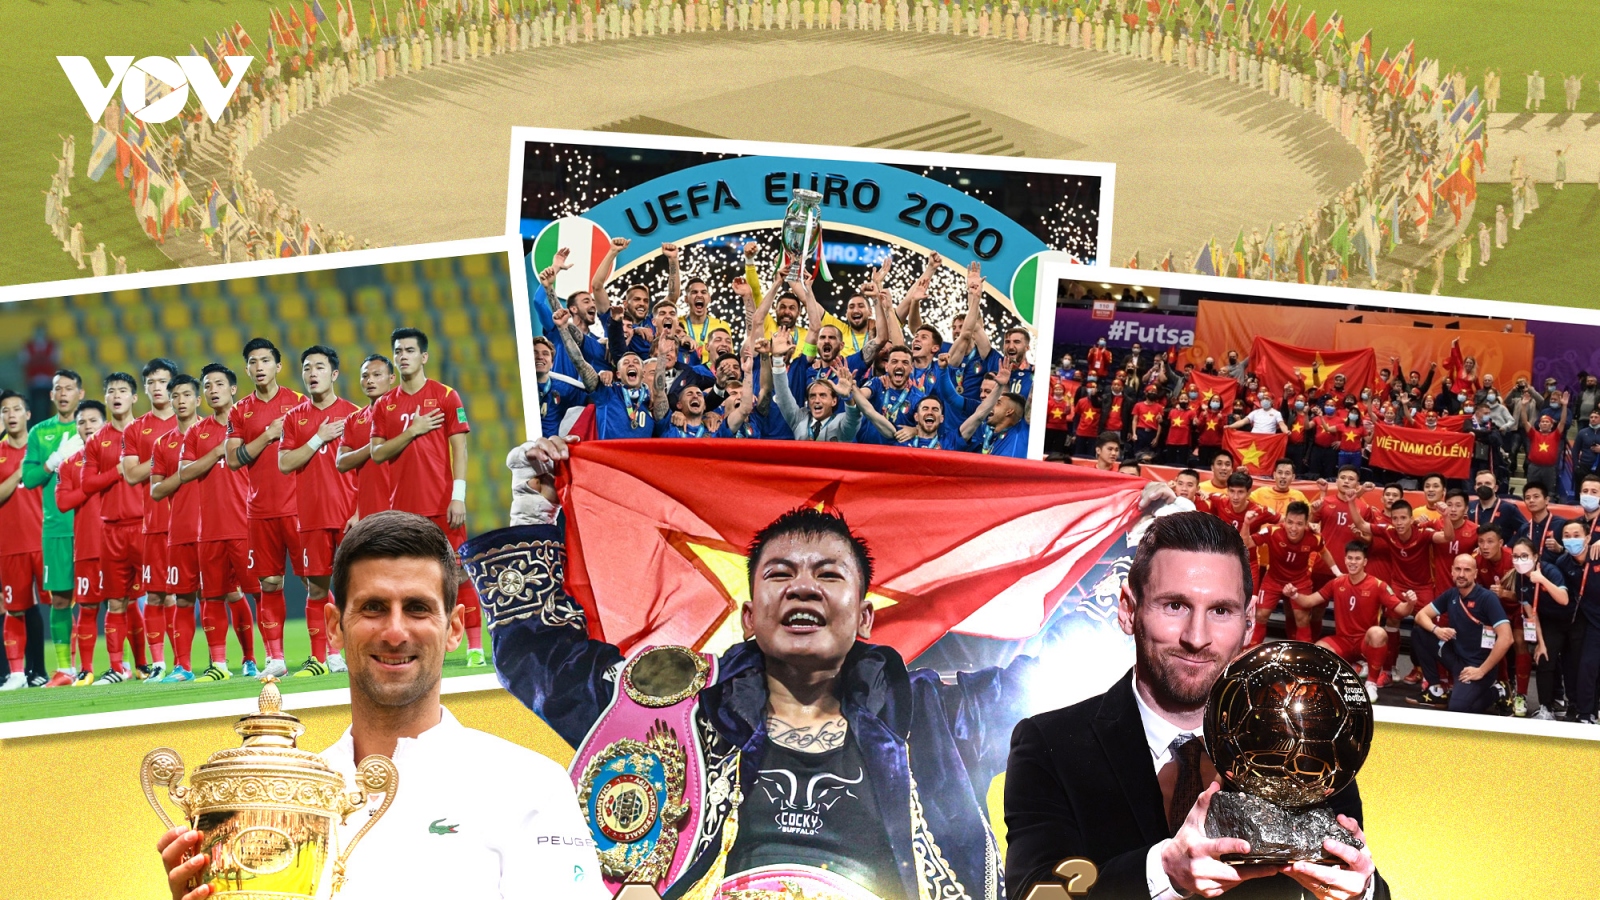 Year in review: Top 10 sporting events